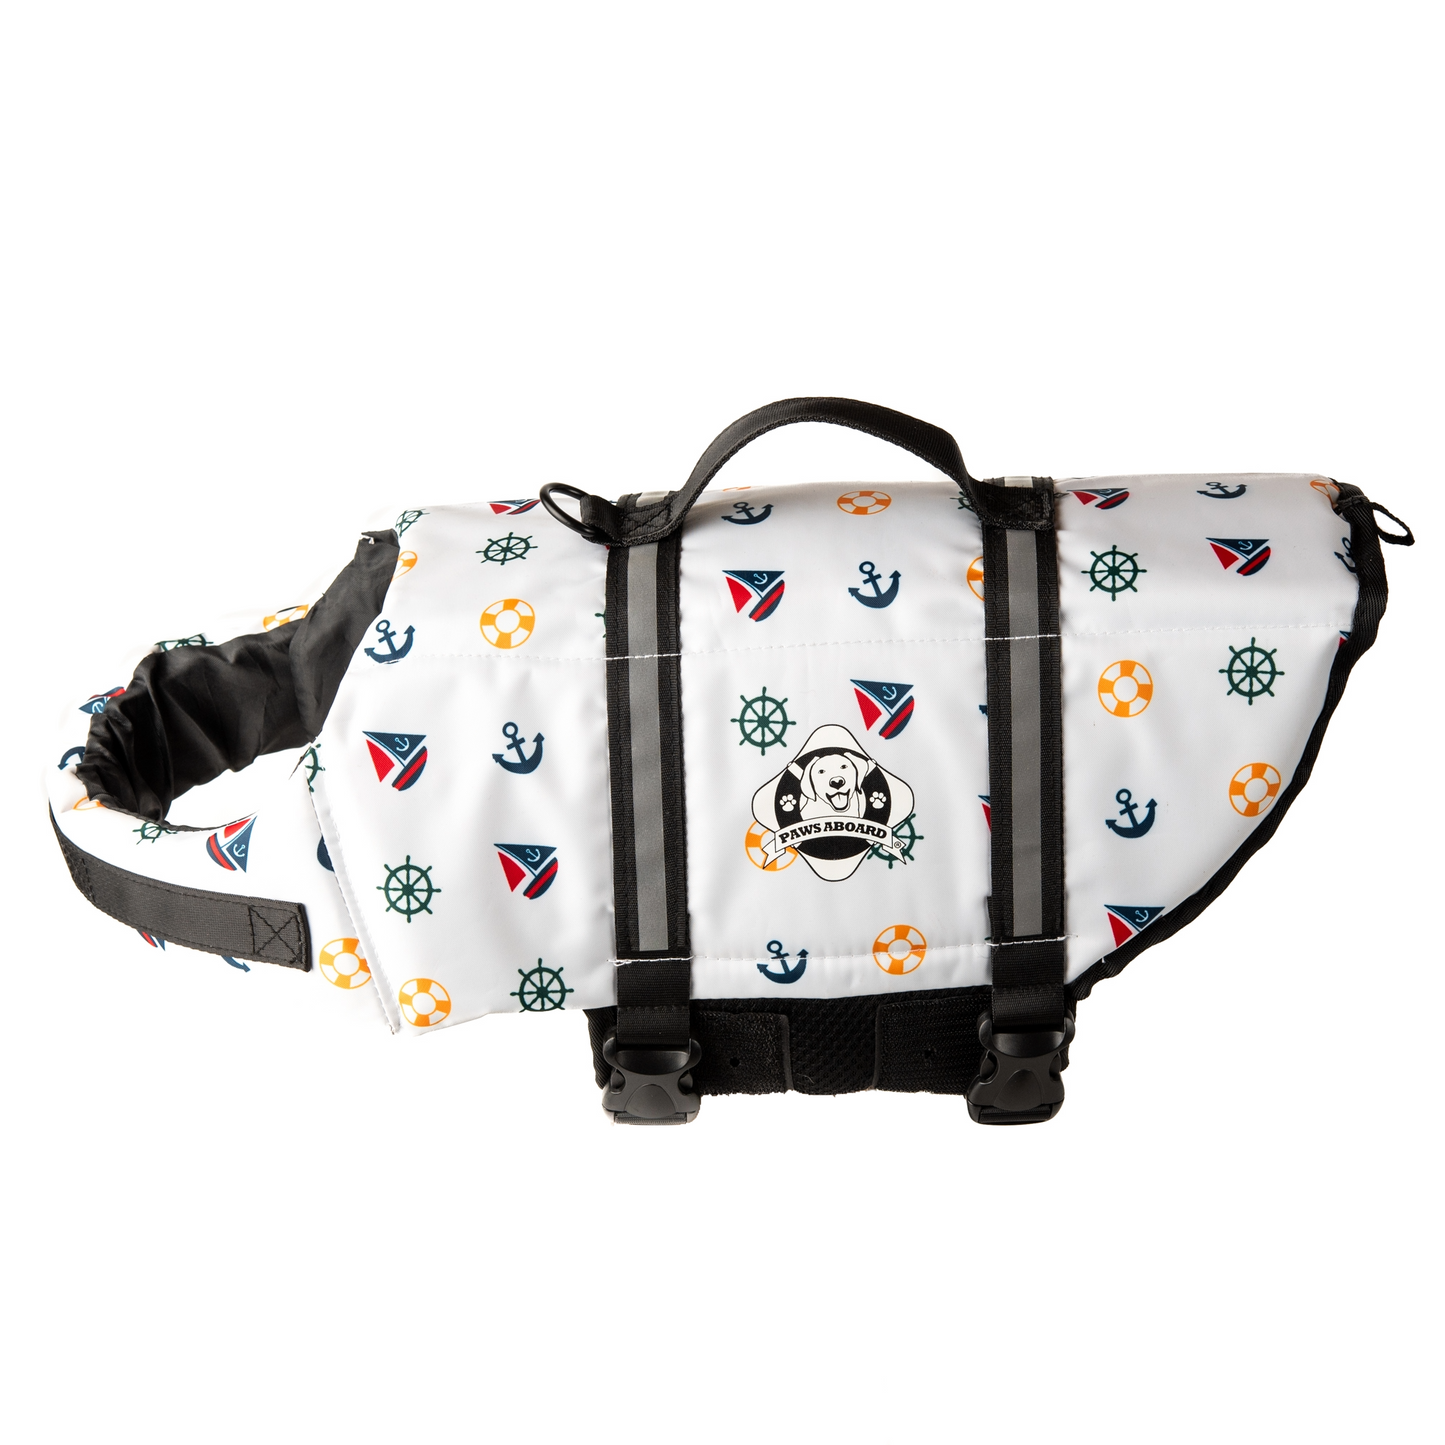 Nautical dog life jacket by Fido Pet Products with reflective strips, breatheable mesh underbelly, and secure handle with leash clip at top.